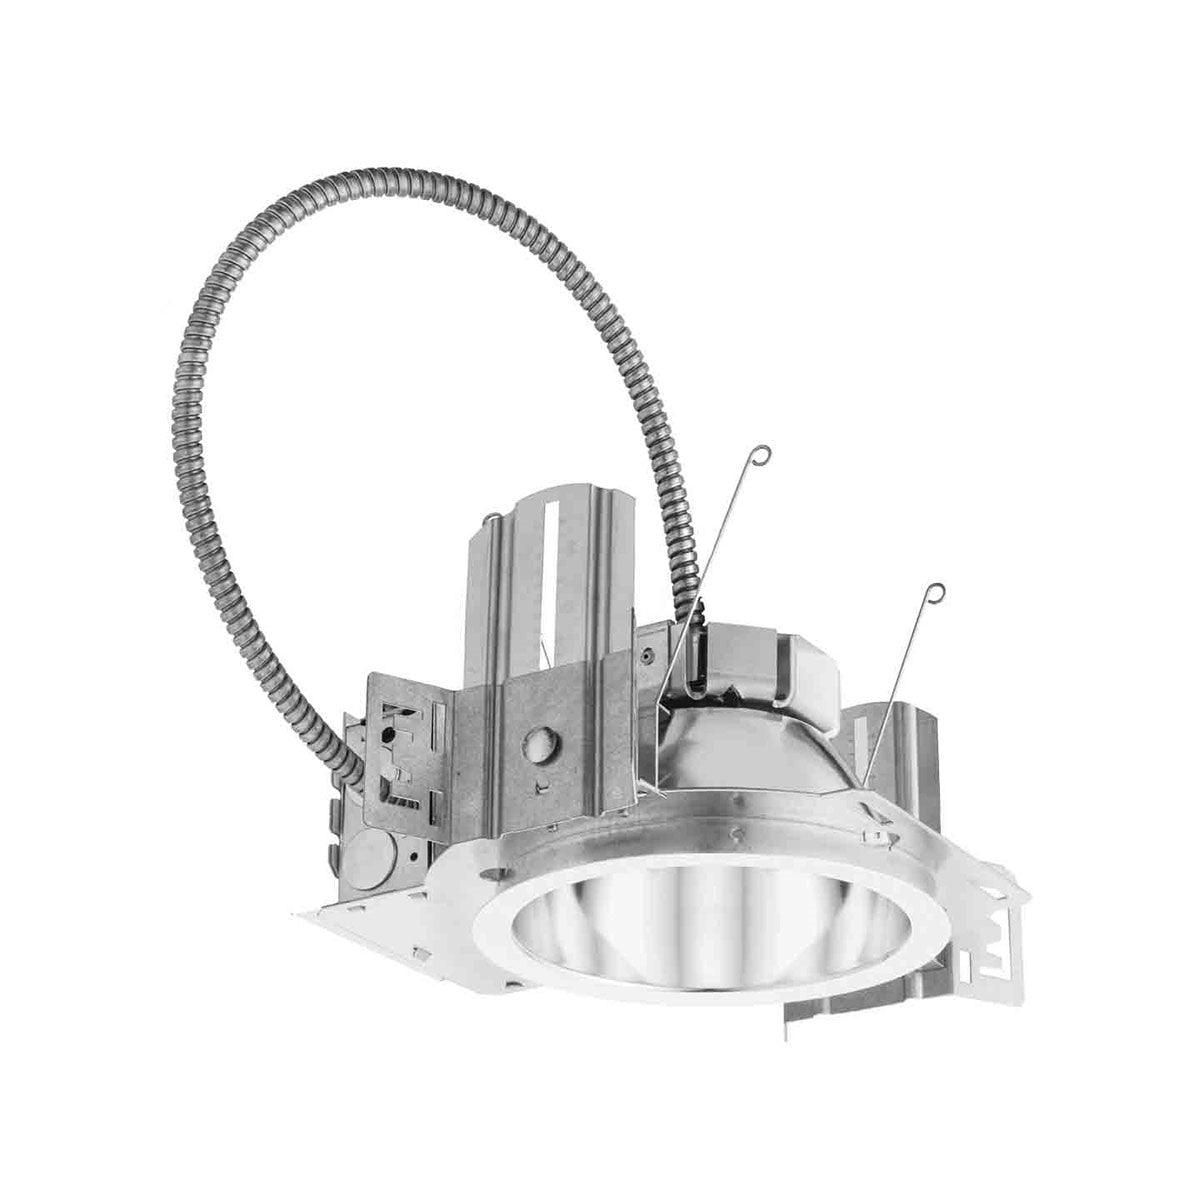 6 in. Commercial LED Downlight, 1500 lumens, 3500K (Reflector Sold Separately)